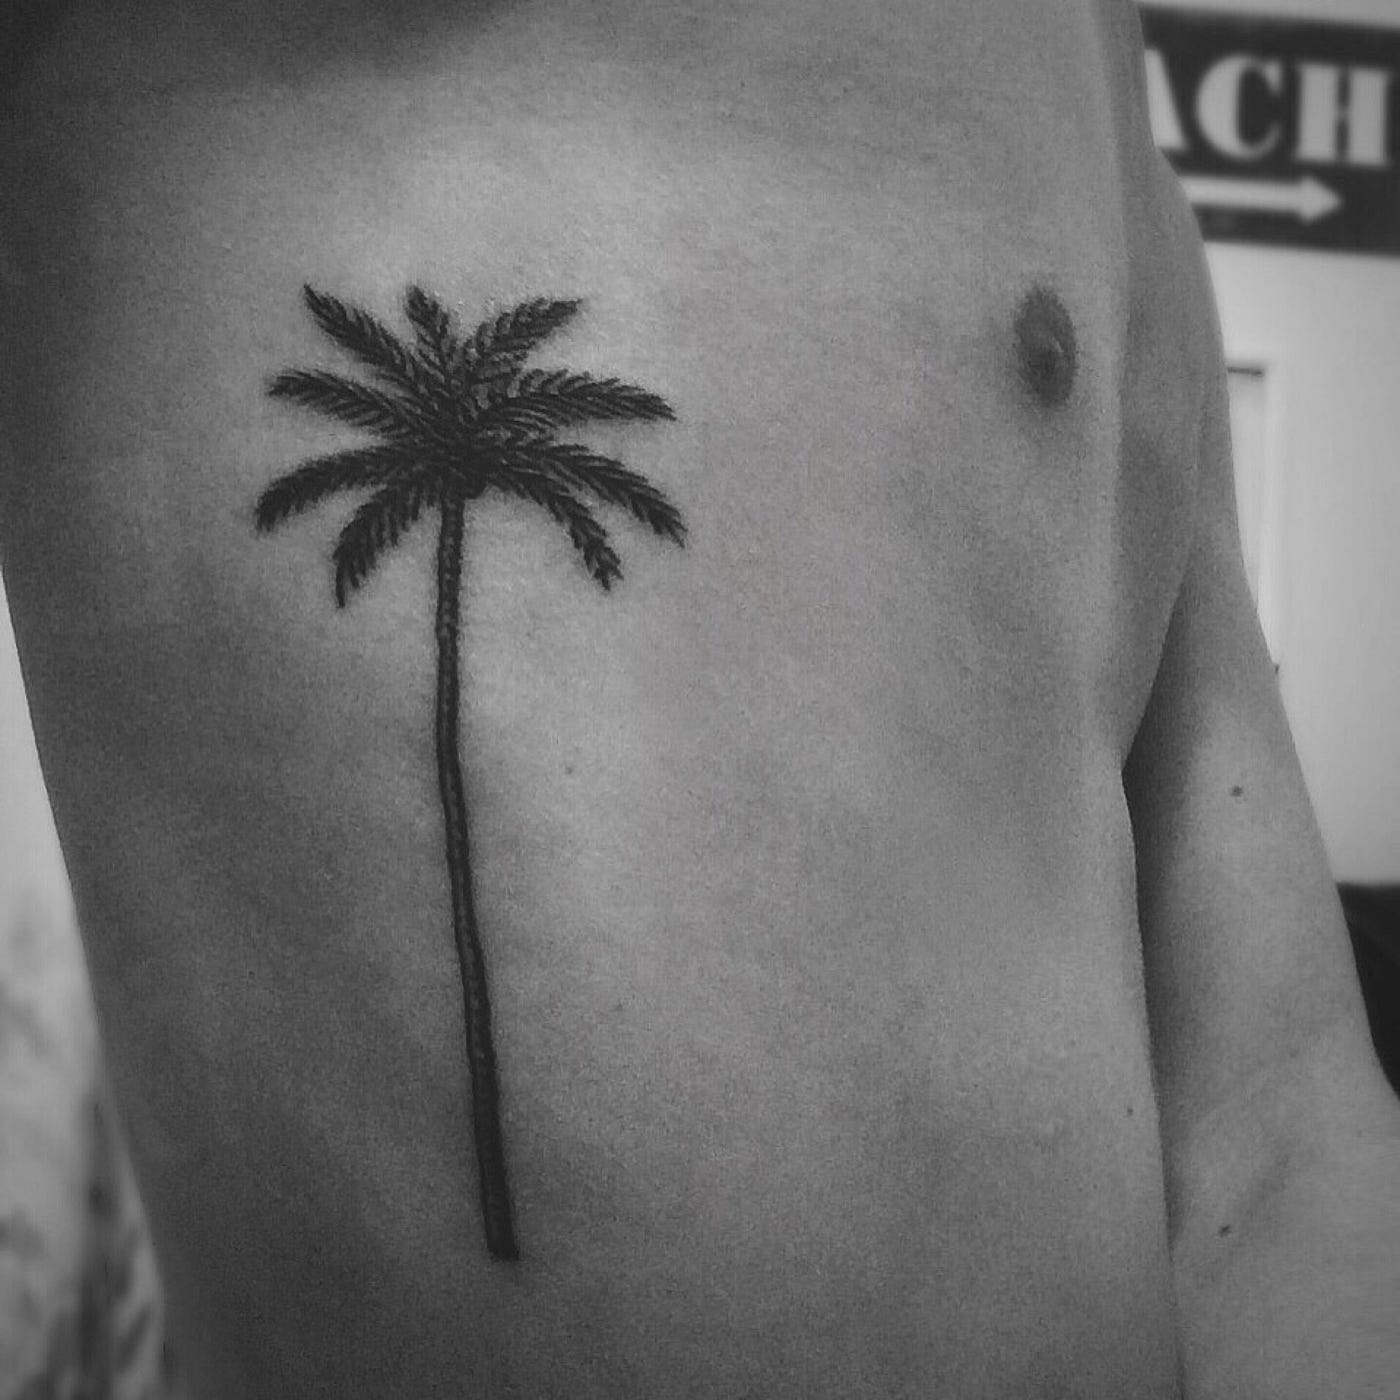 Miami Tattoo Co  Tattoo by Steven PM   Color Palm Tree    Available Appointments  miamitattooco stevenpm3 palmtree miami  miamibeach tattoo ink StevenPM  Facebook